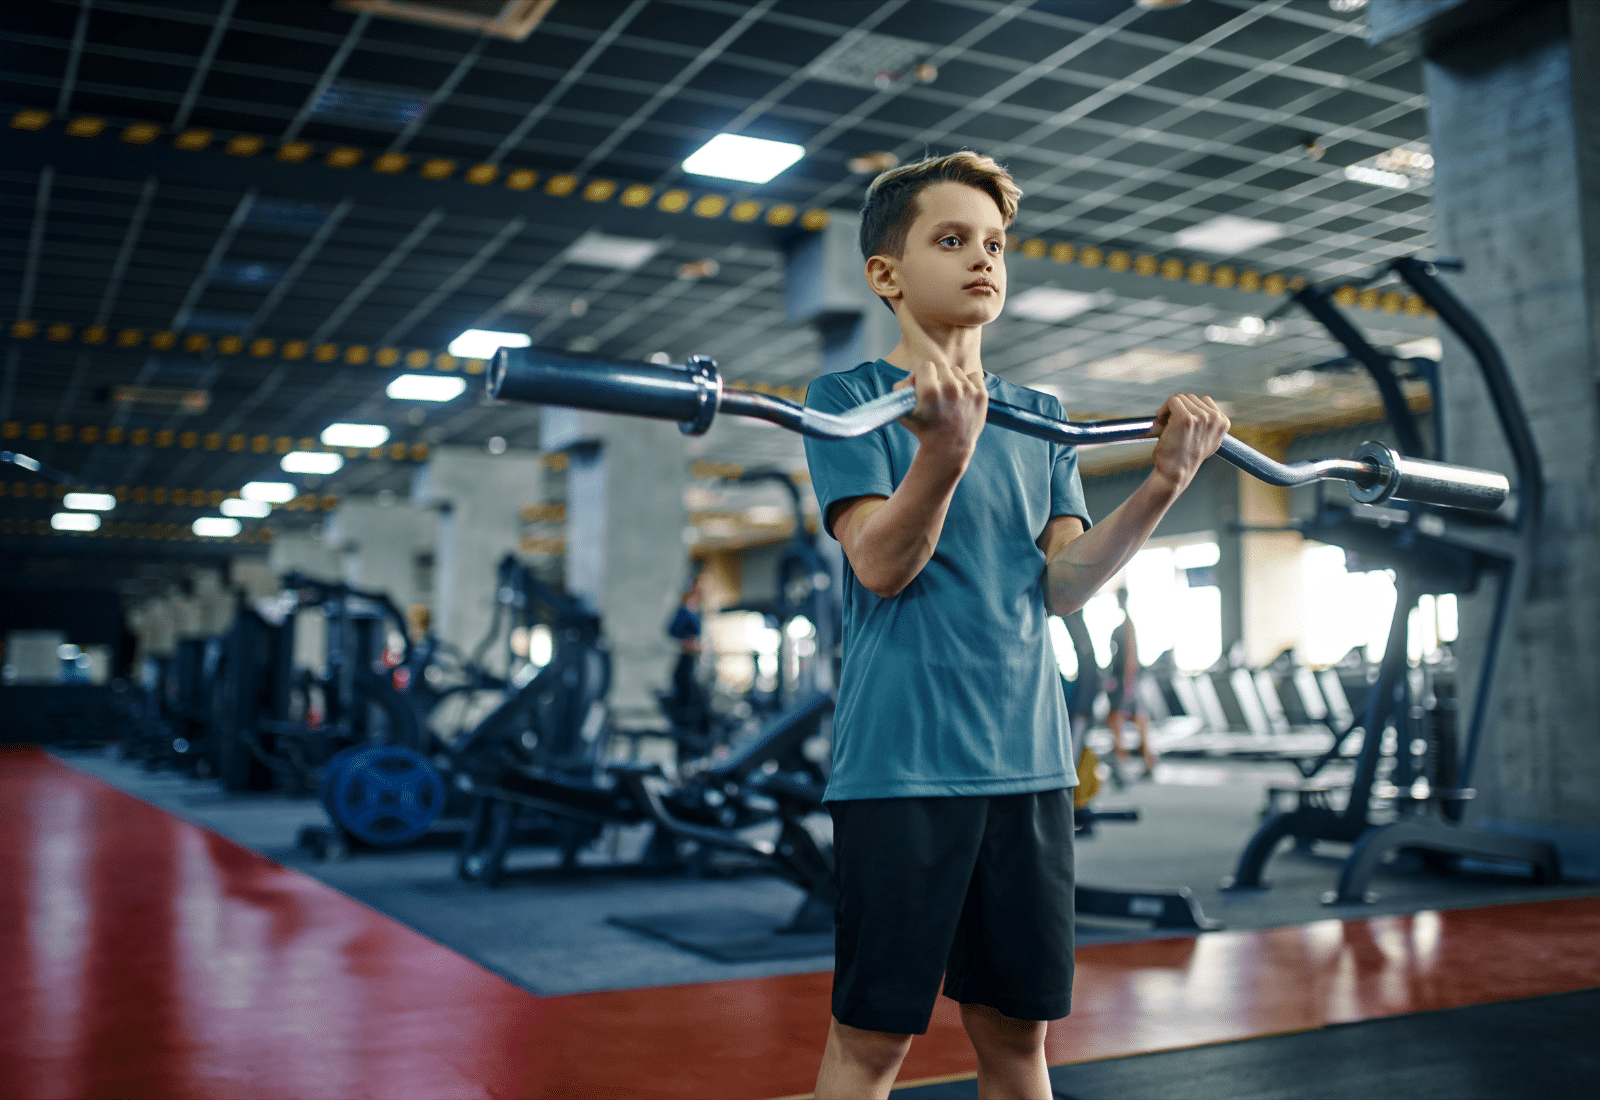 Image of a youth athlete training in a gym